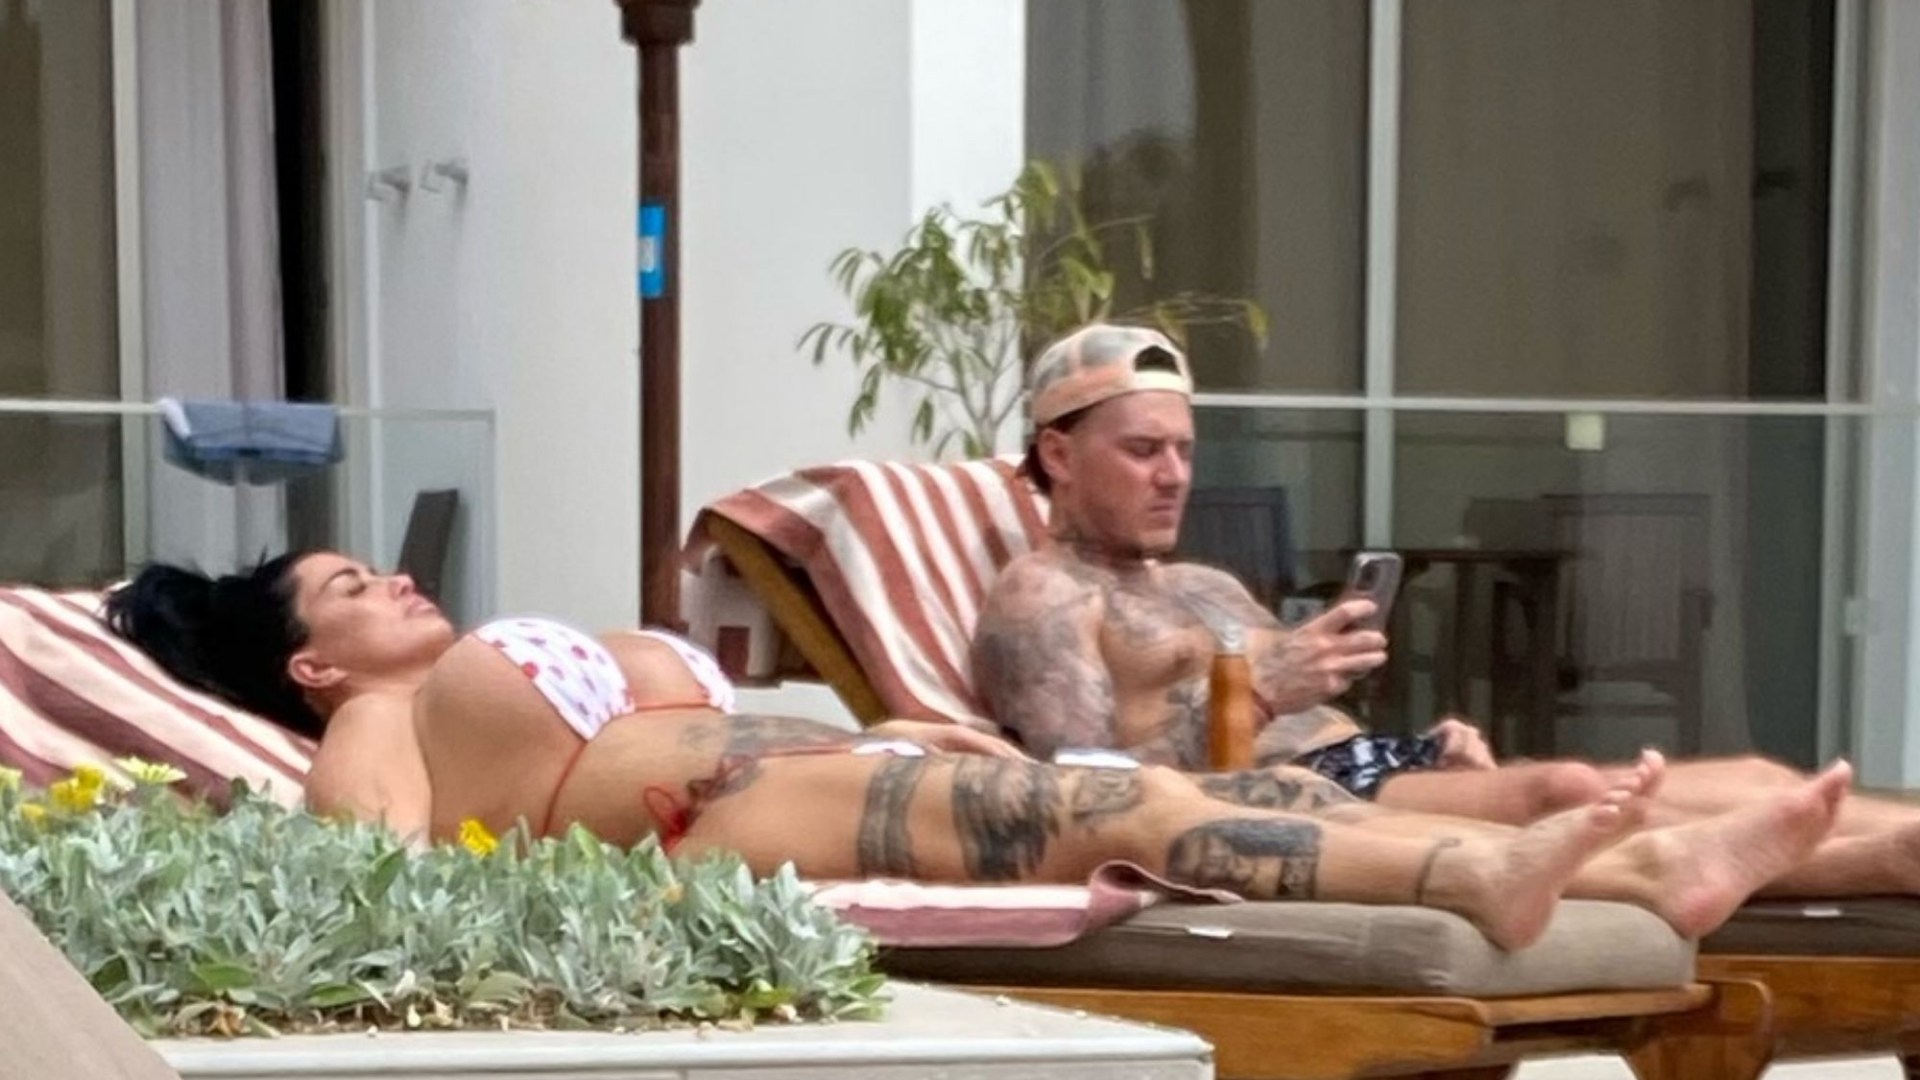 Katie Price relaxes poolside at 760-a-night hotel in Ayia Napa after dodging bankruptcy hearing due to ‘anxiety’ [Video]